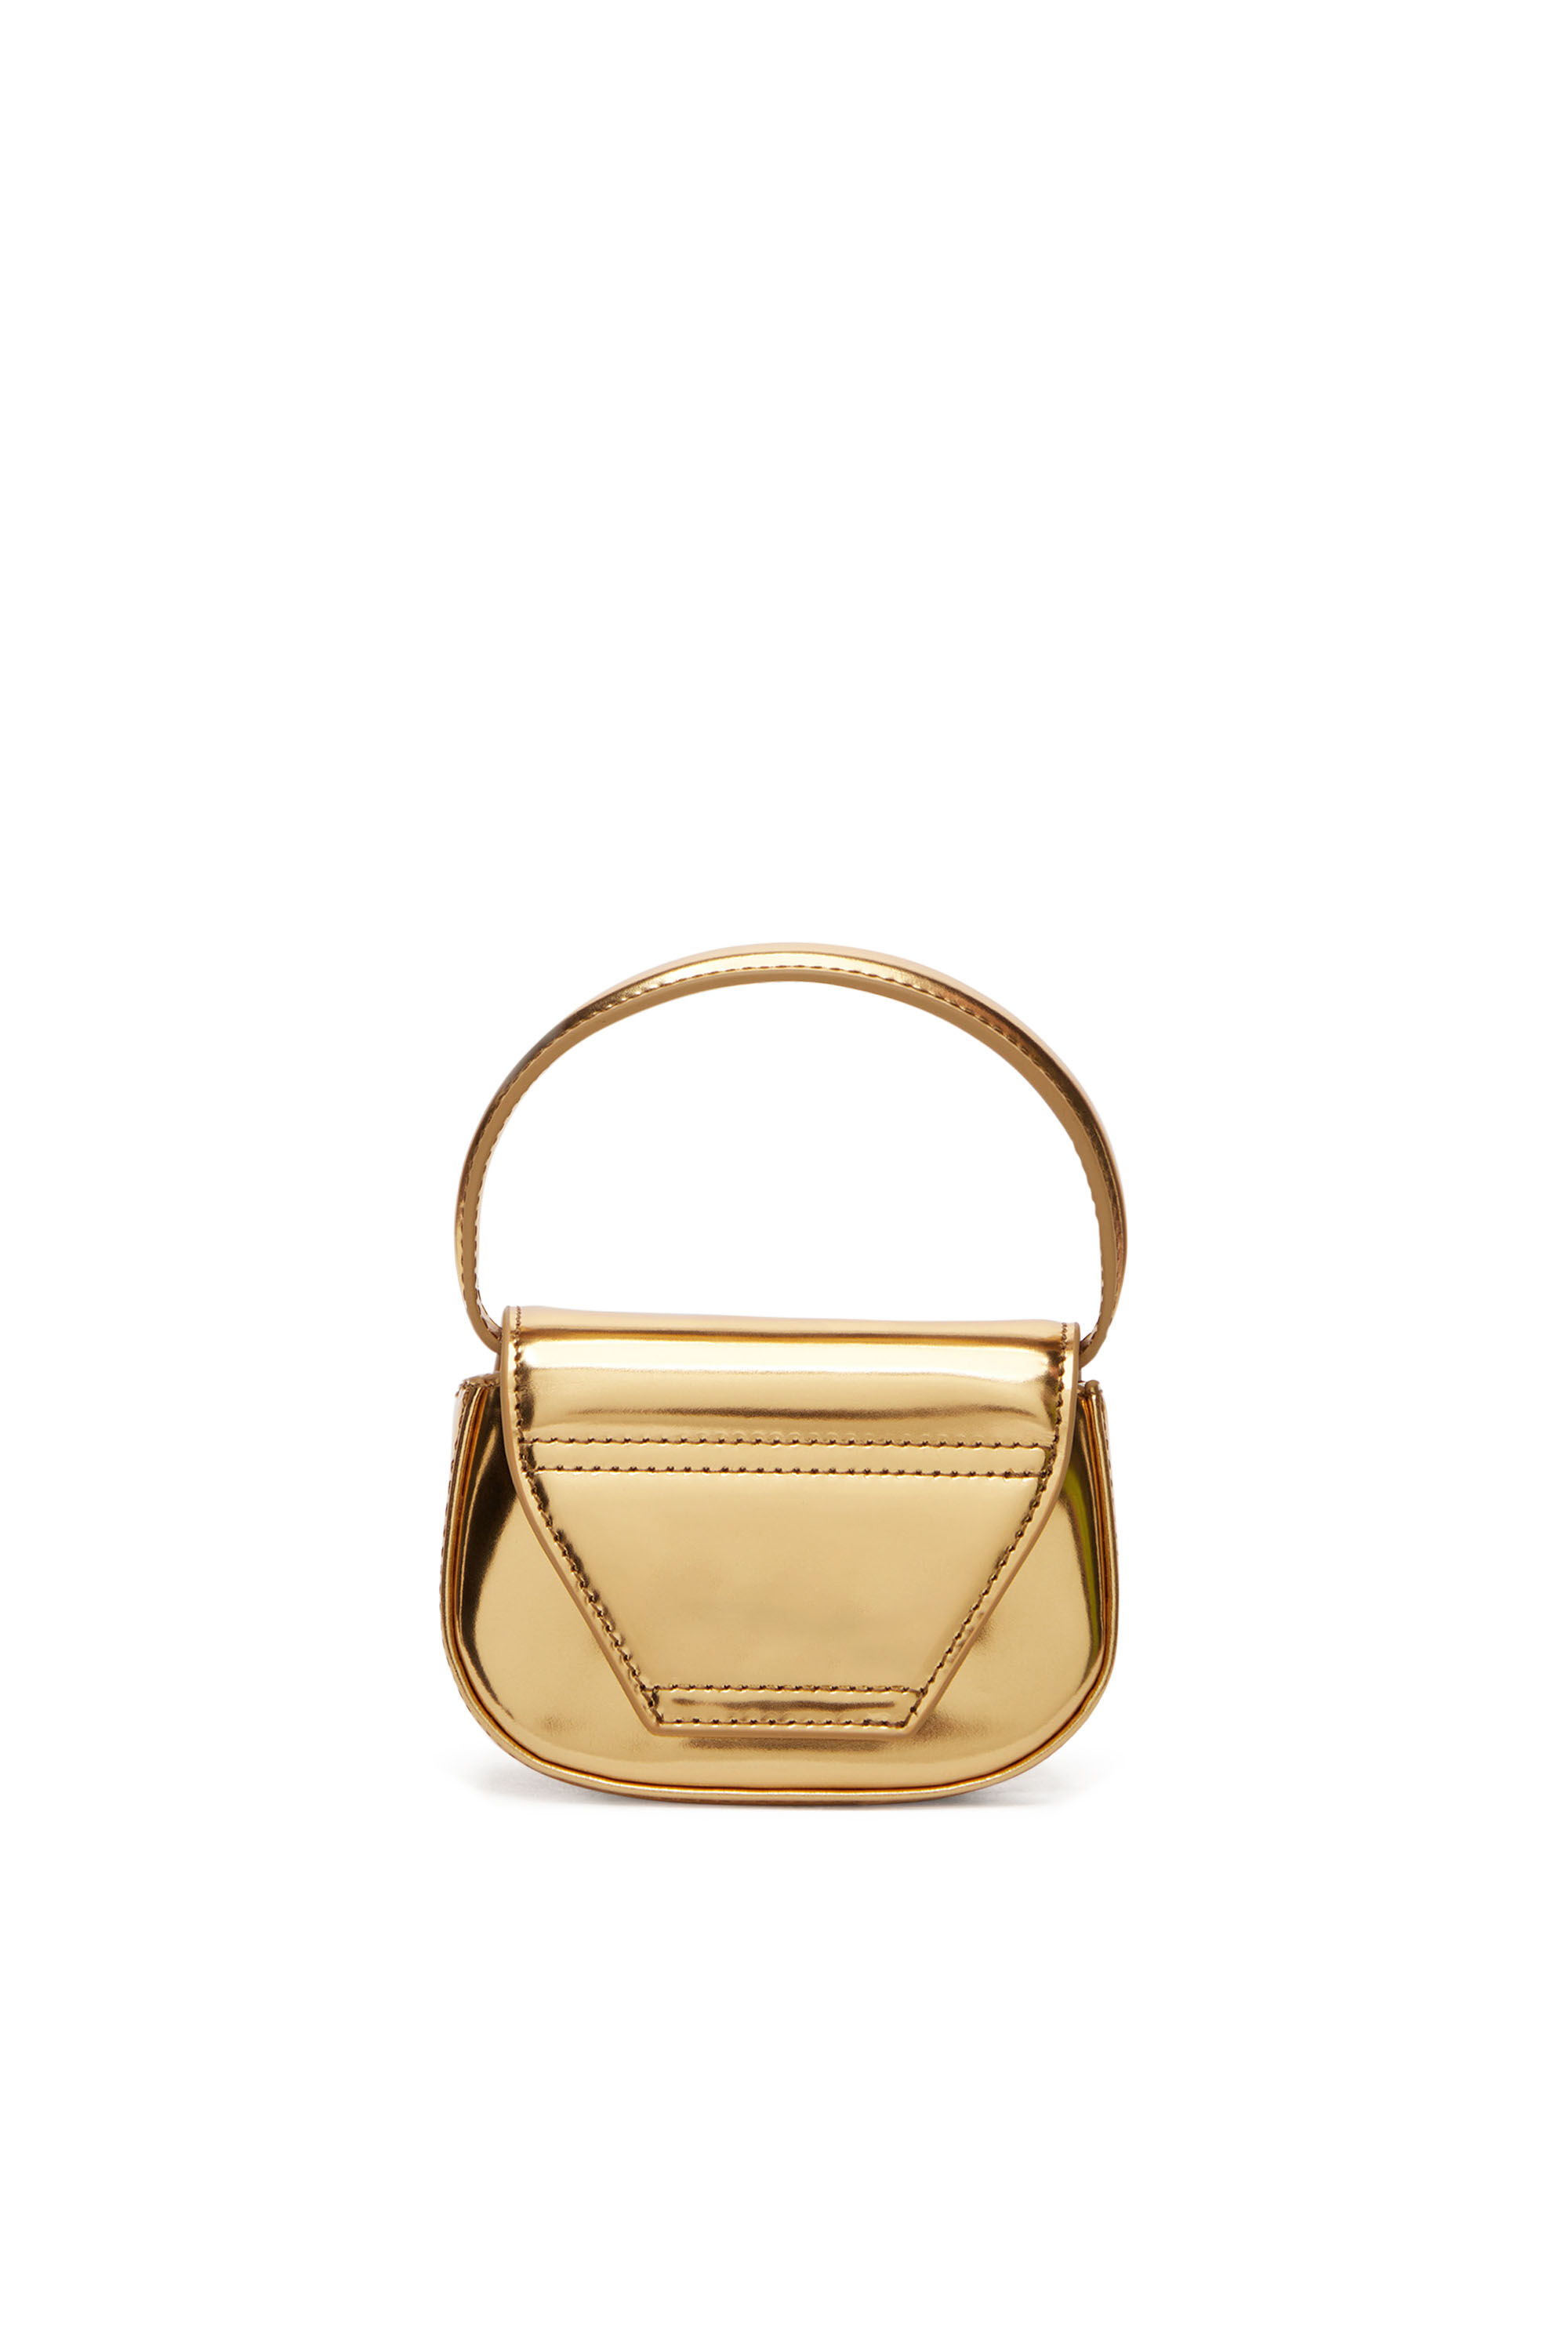 1DR-XS-S Woman: Mini bag in mirrored leather | Diesel